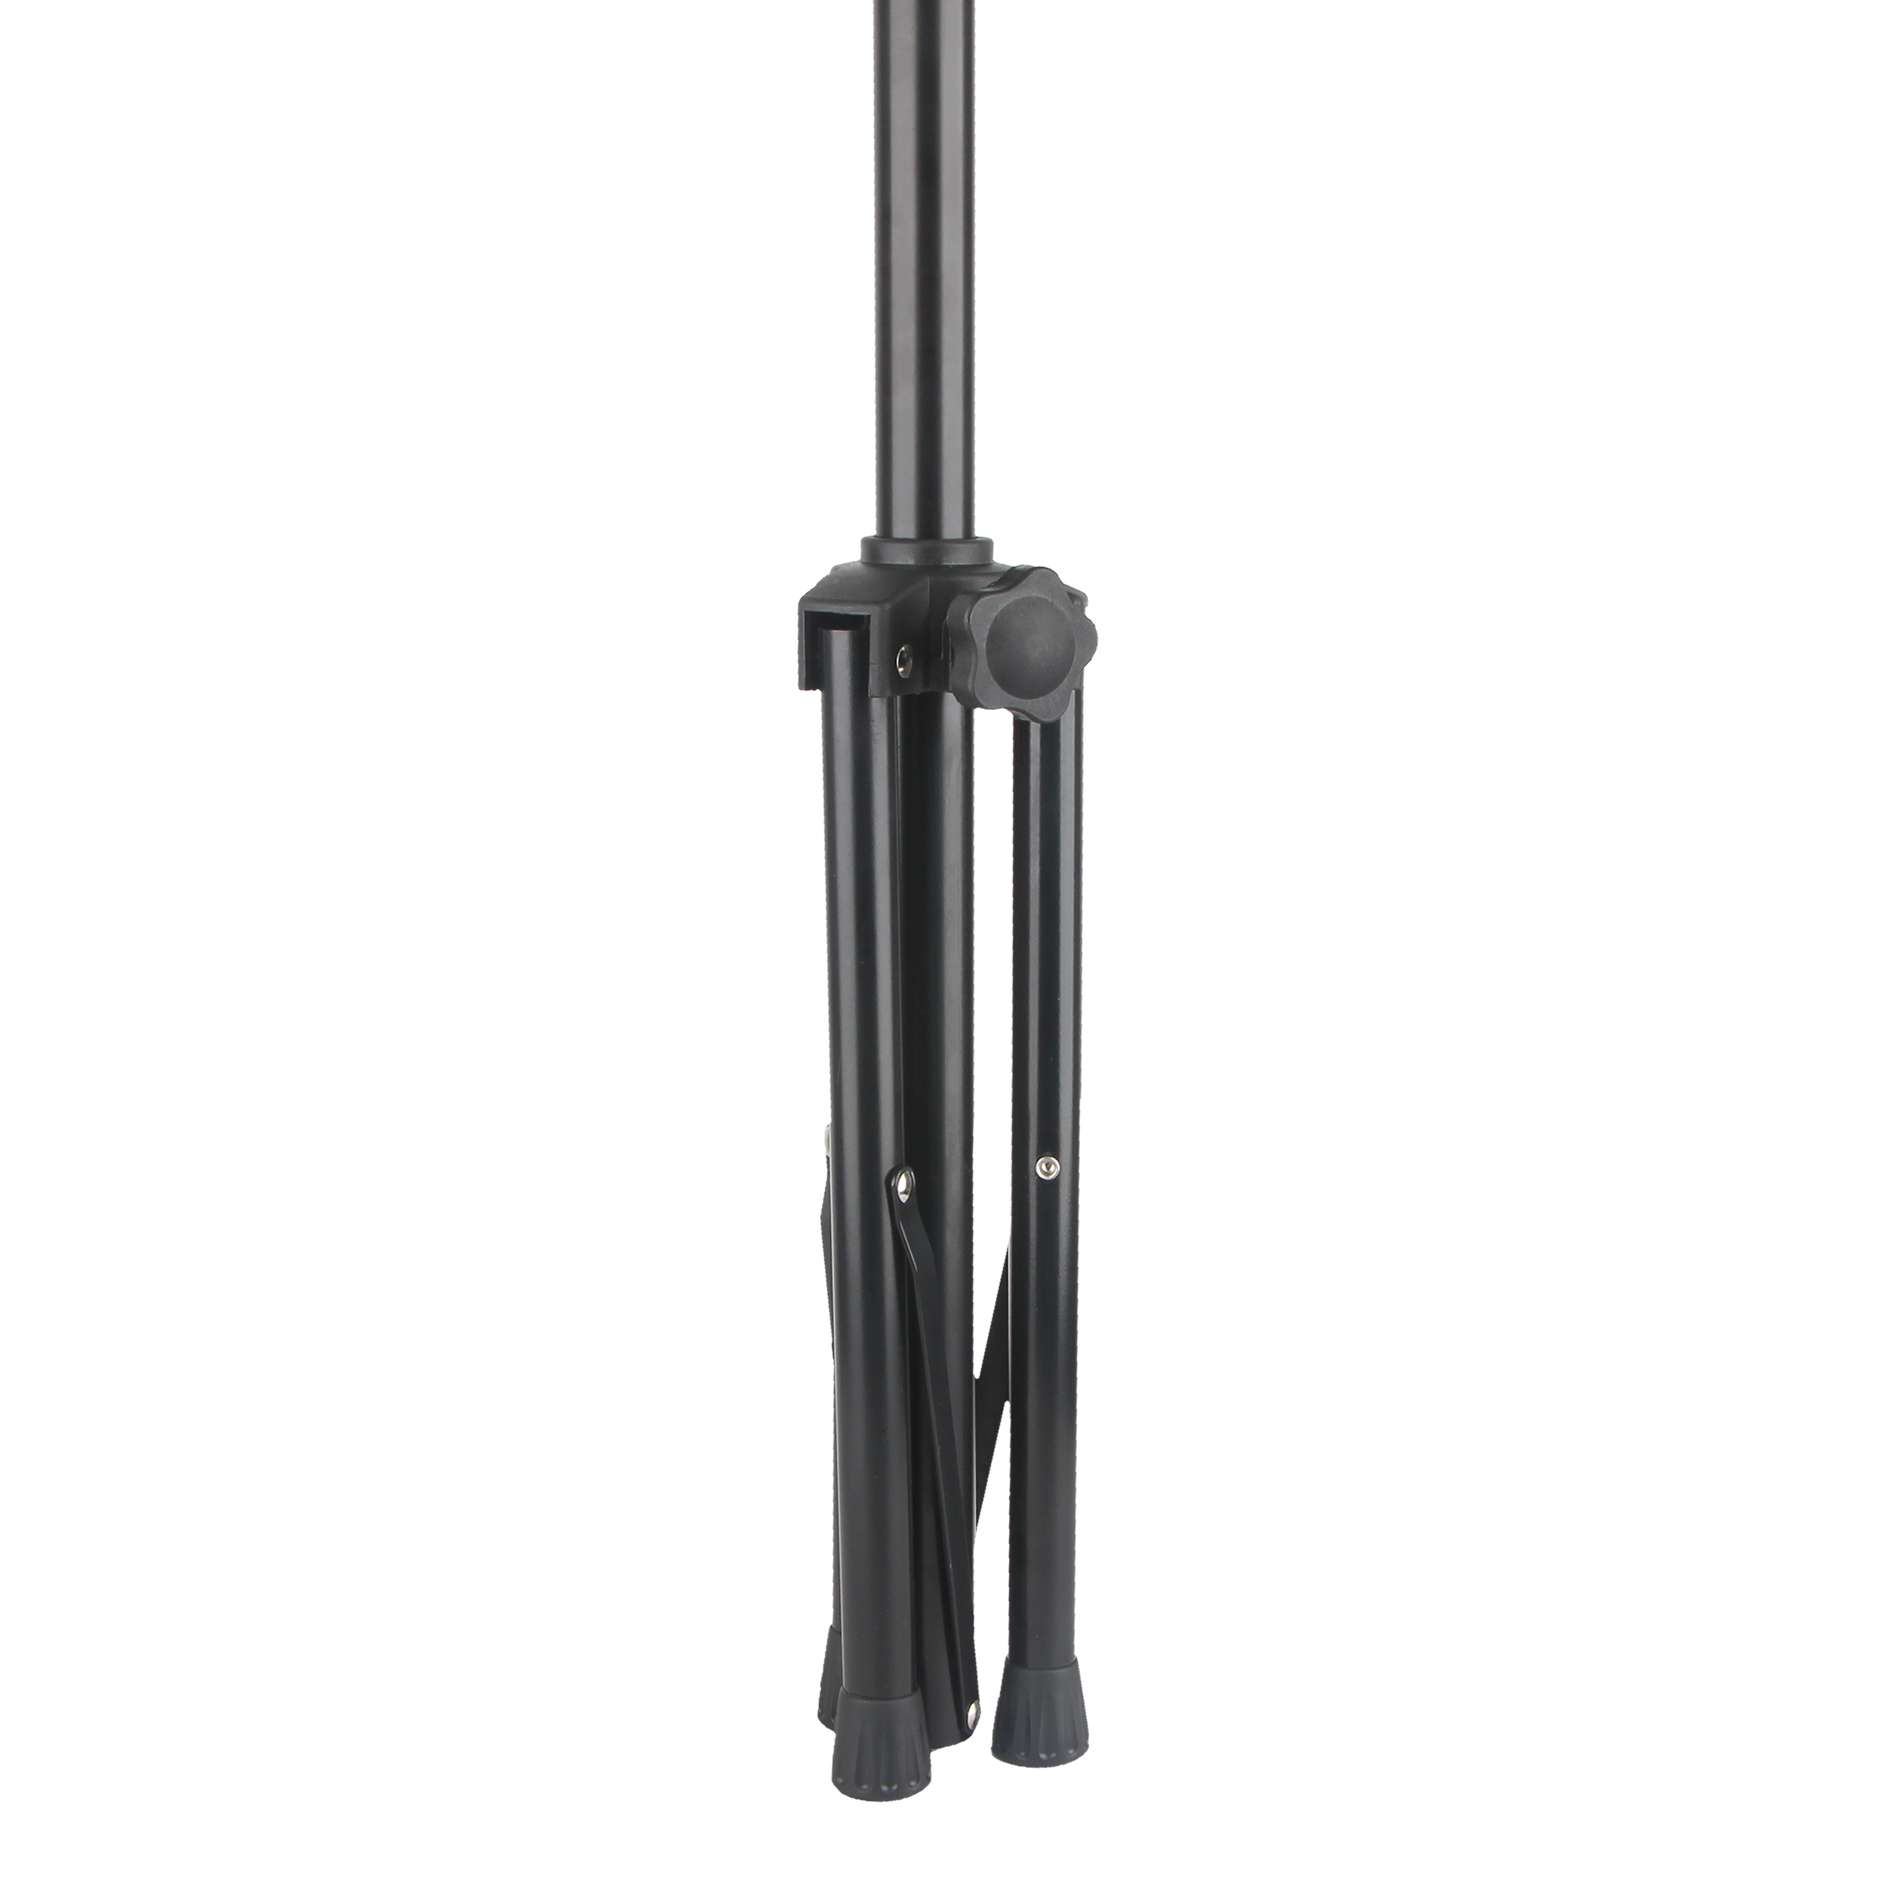 Power Pf 32 Pied Pour Filtre Antibruit - Microphone stand - Variation 2